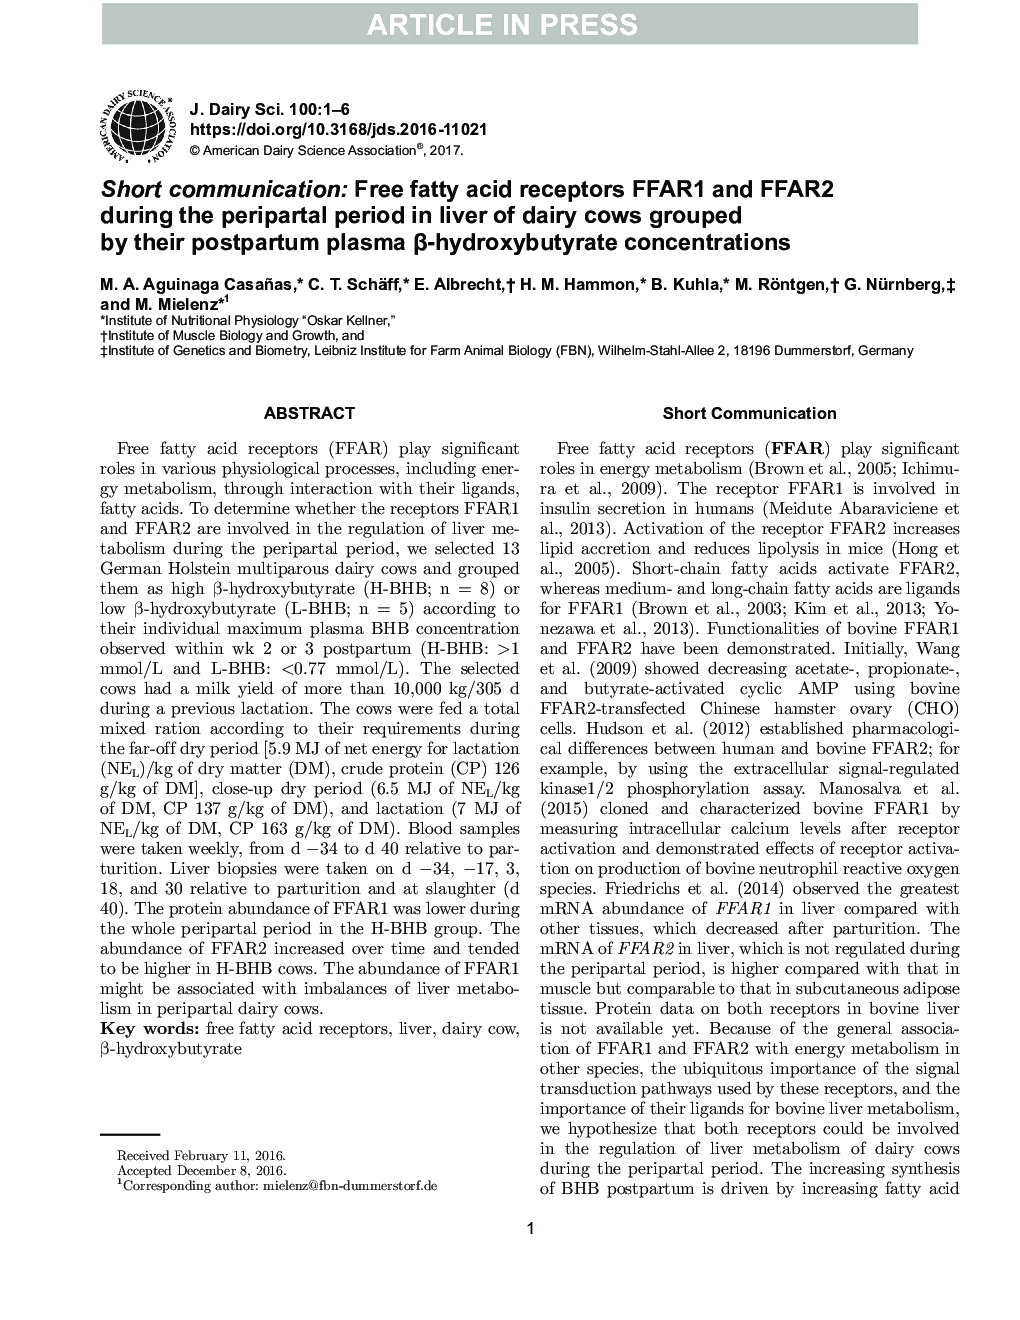 Short communication: Free fatty acid receptors FFAR1 and FFAR2 during the peripartal period in liver of dairy cows grouped by their postpartum plasma Î²-hydroxybutyrate concentrations